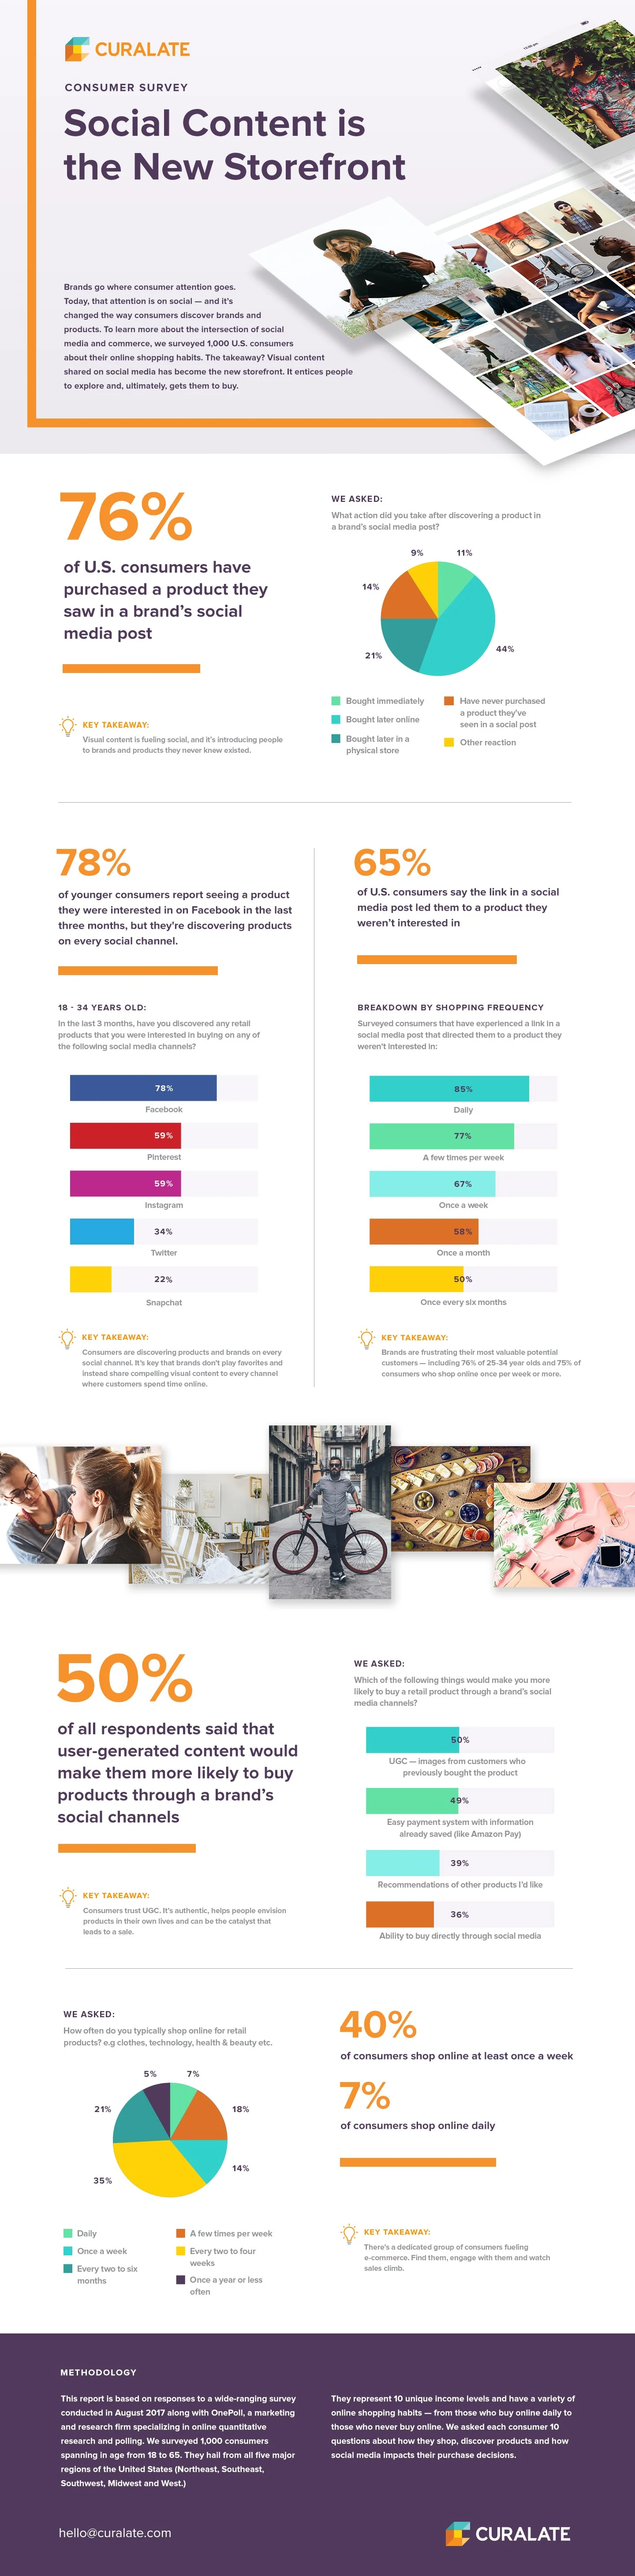 Consumer Survey: Social Content is the New Storefront - #infographic